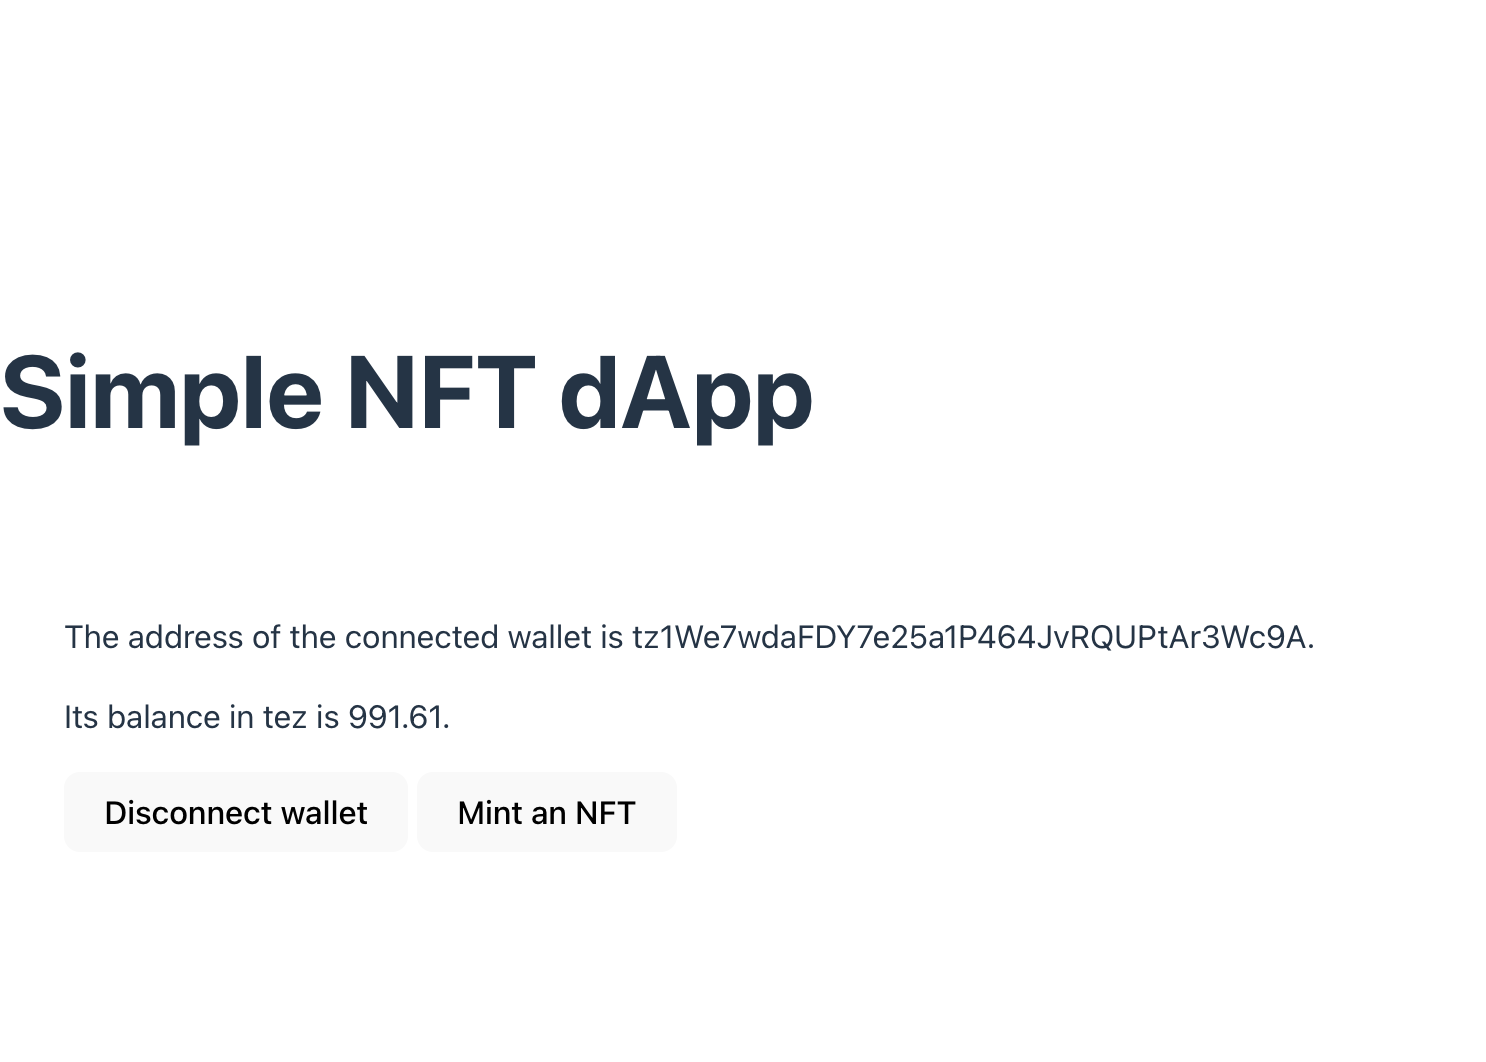 interface section after connecting the wallet